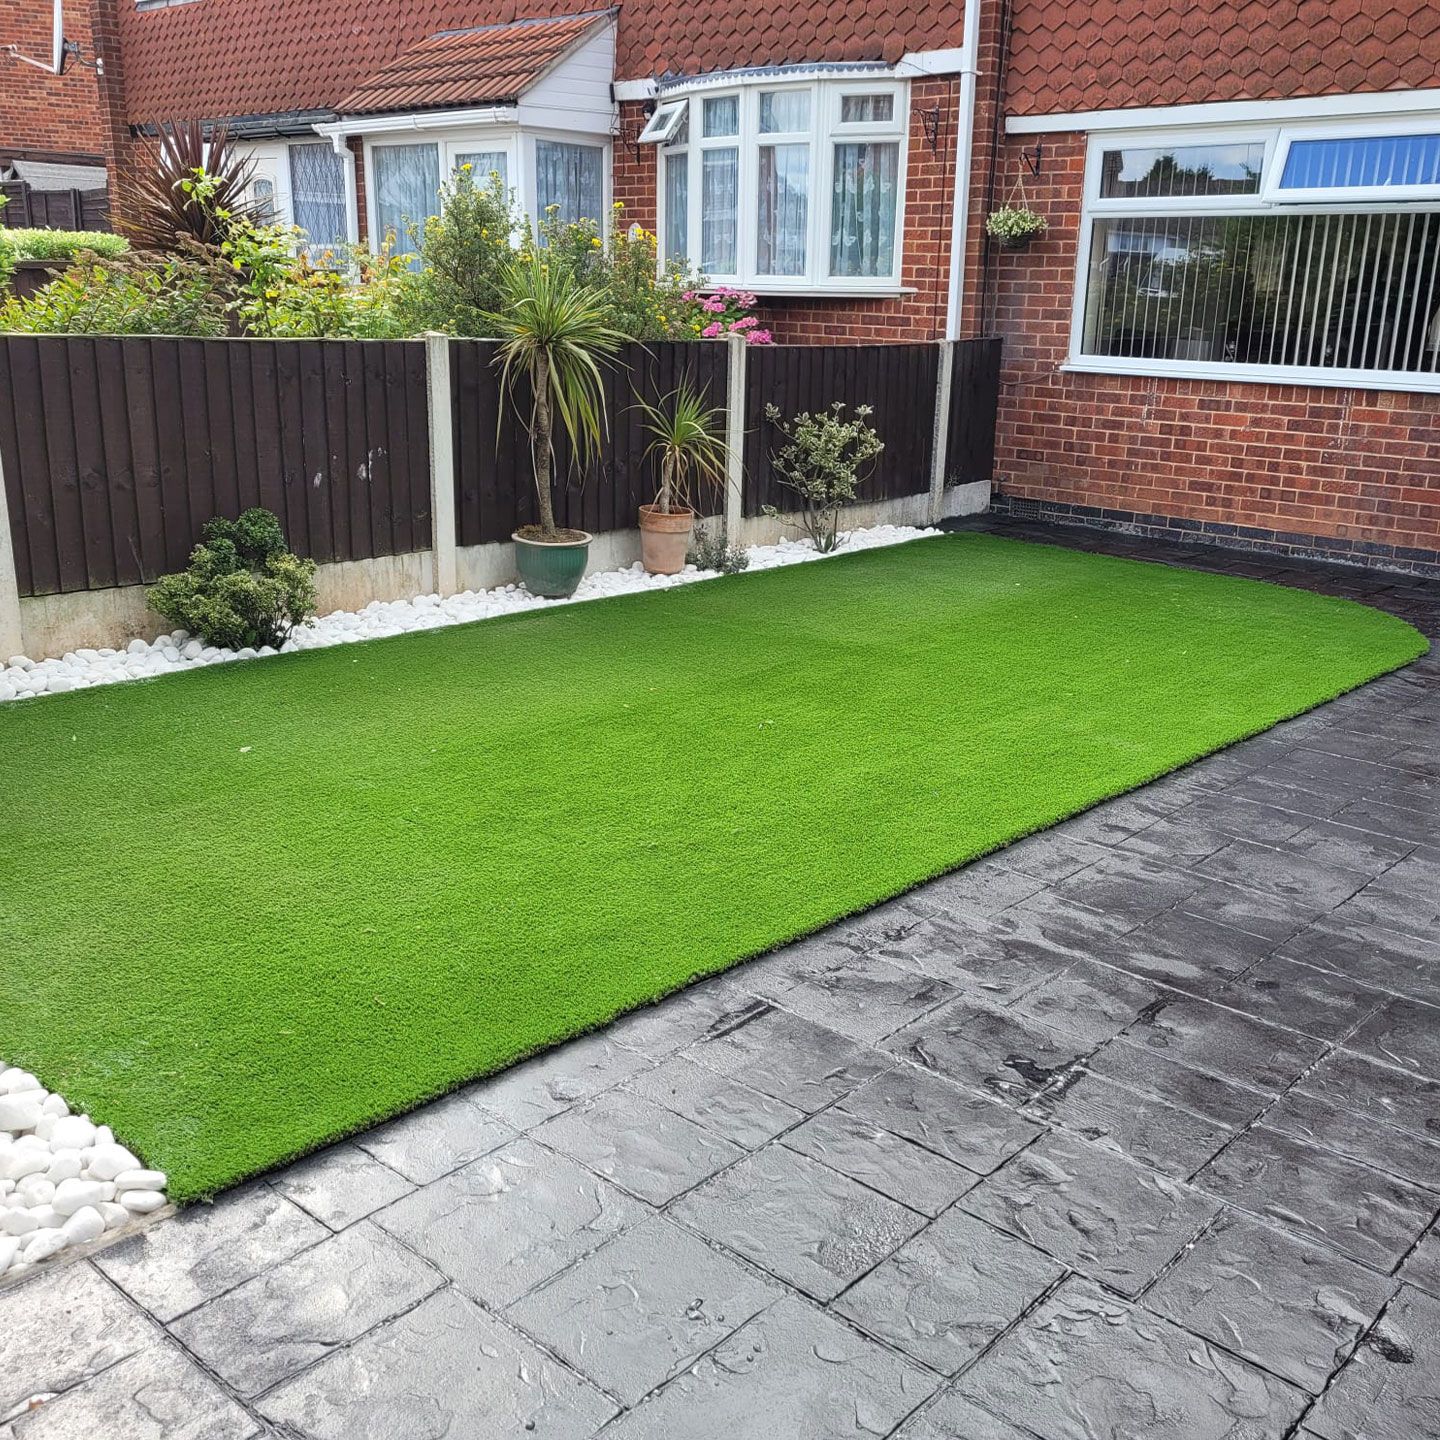 landscaping in Rugby showing new artificial grass and patterned concrete paving